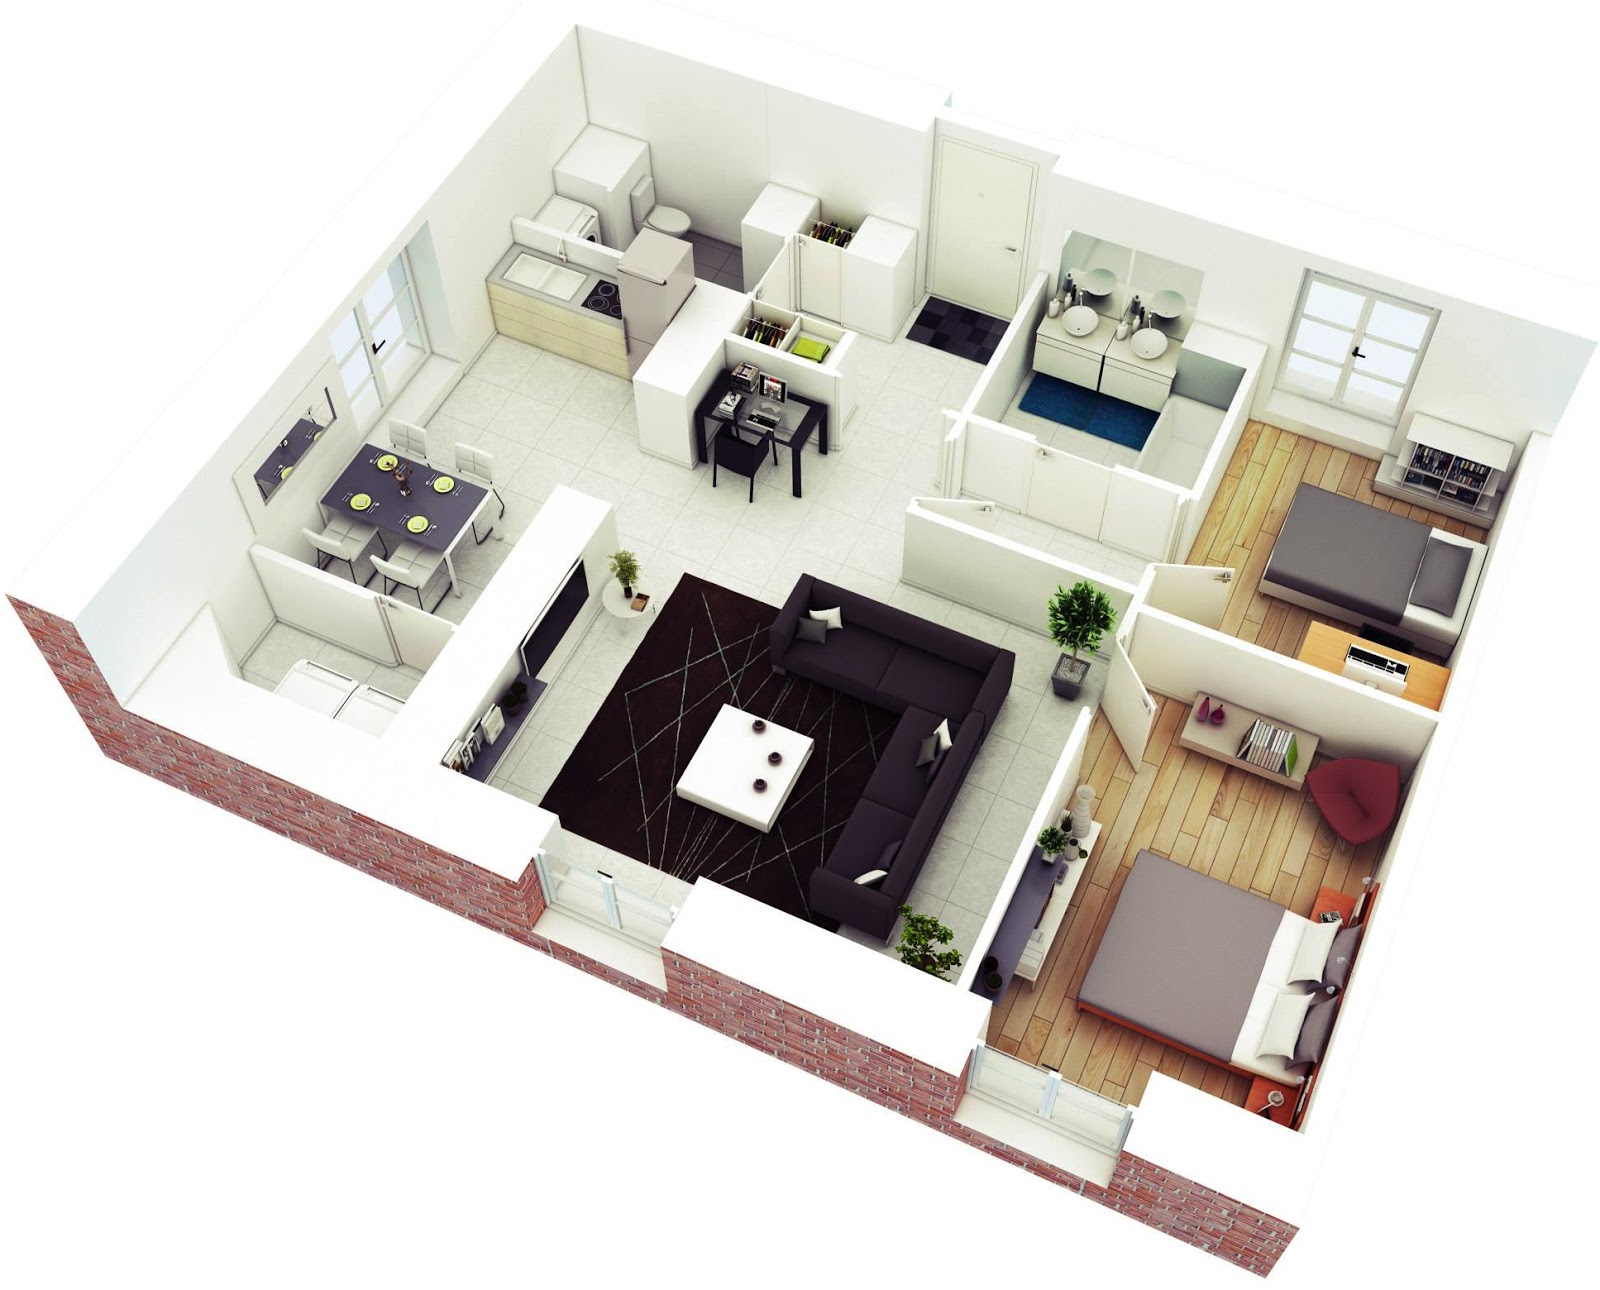 Awesome 3D floor plans for small or medium house